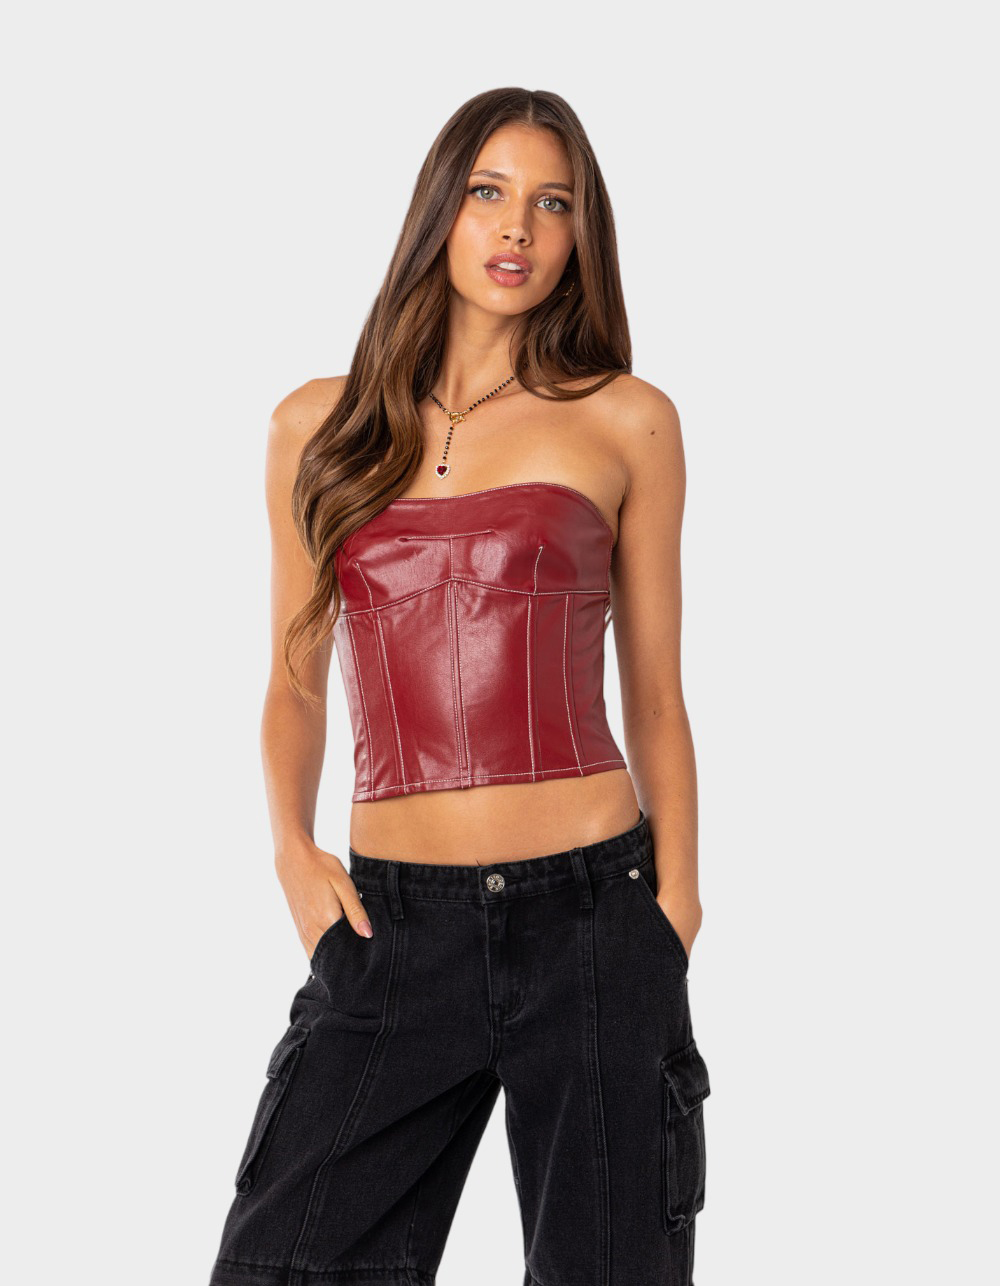 EDIKTED Moss Faux Leather Lace Up Womens Corset Top - DK RED